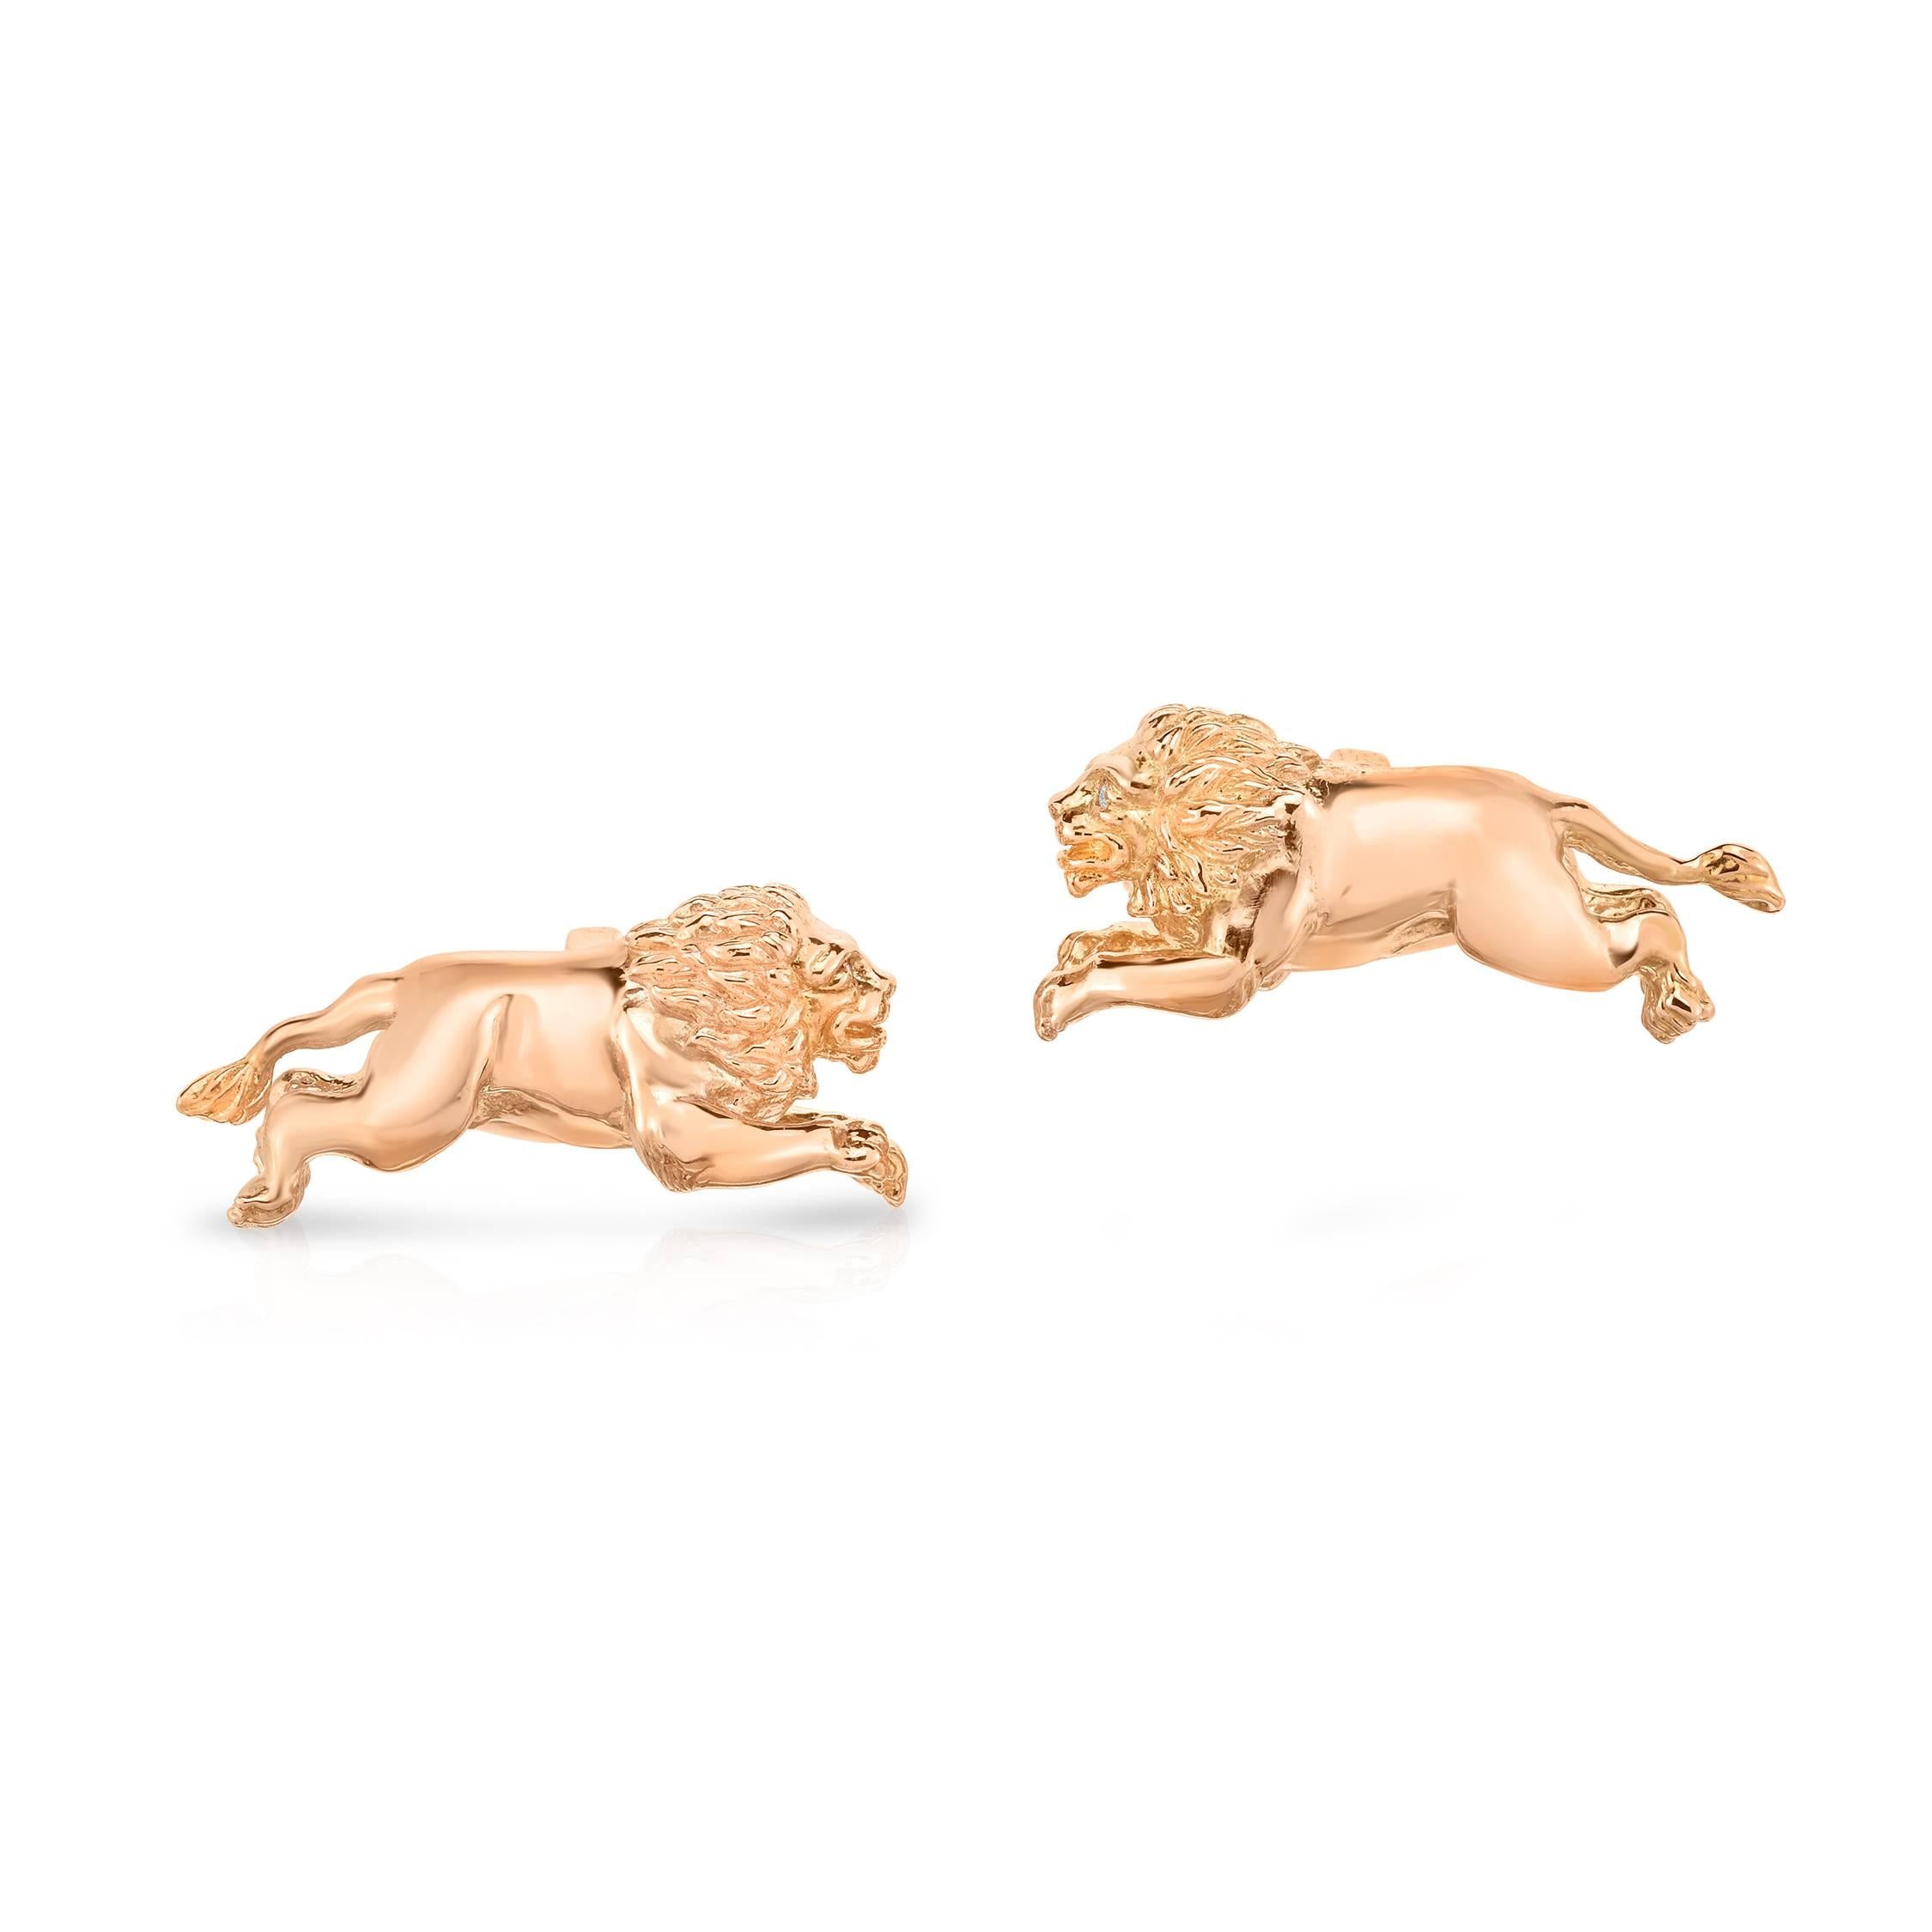 18k Rose Gold and Diamond cufflinks hand crafted in New York City. Three dimensional carved lion cufflinks with diamond eyes. These cufflinks make a perfect Father's Day gift or the perfect gift for the father, husband or boyfriend in your life.